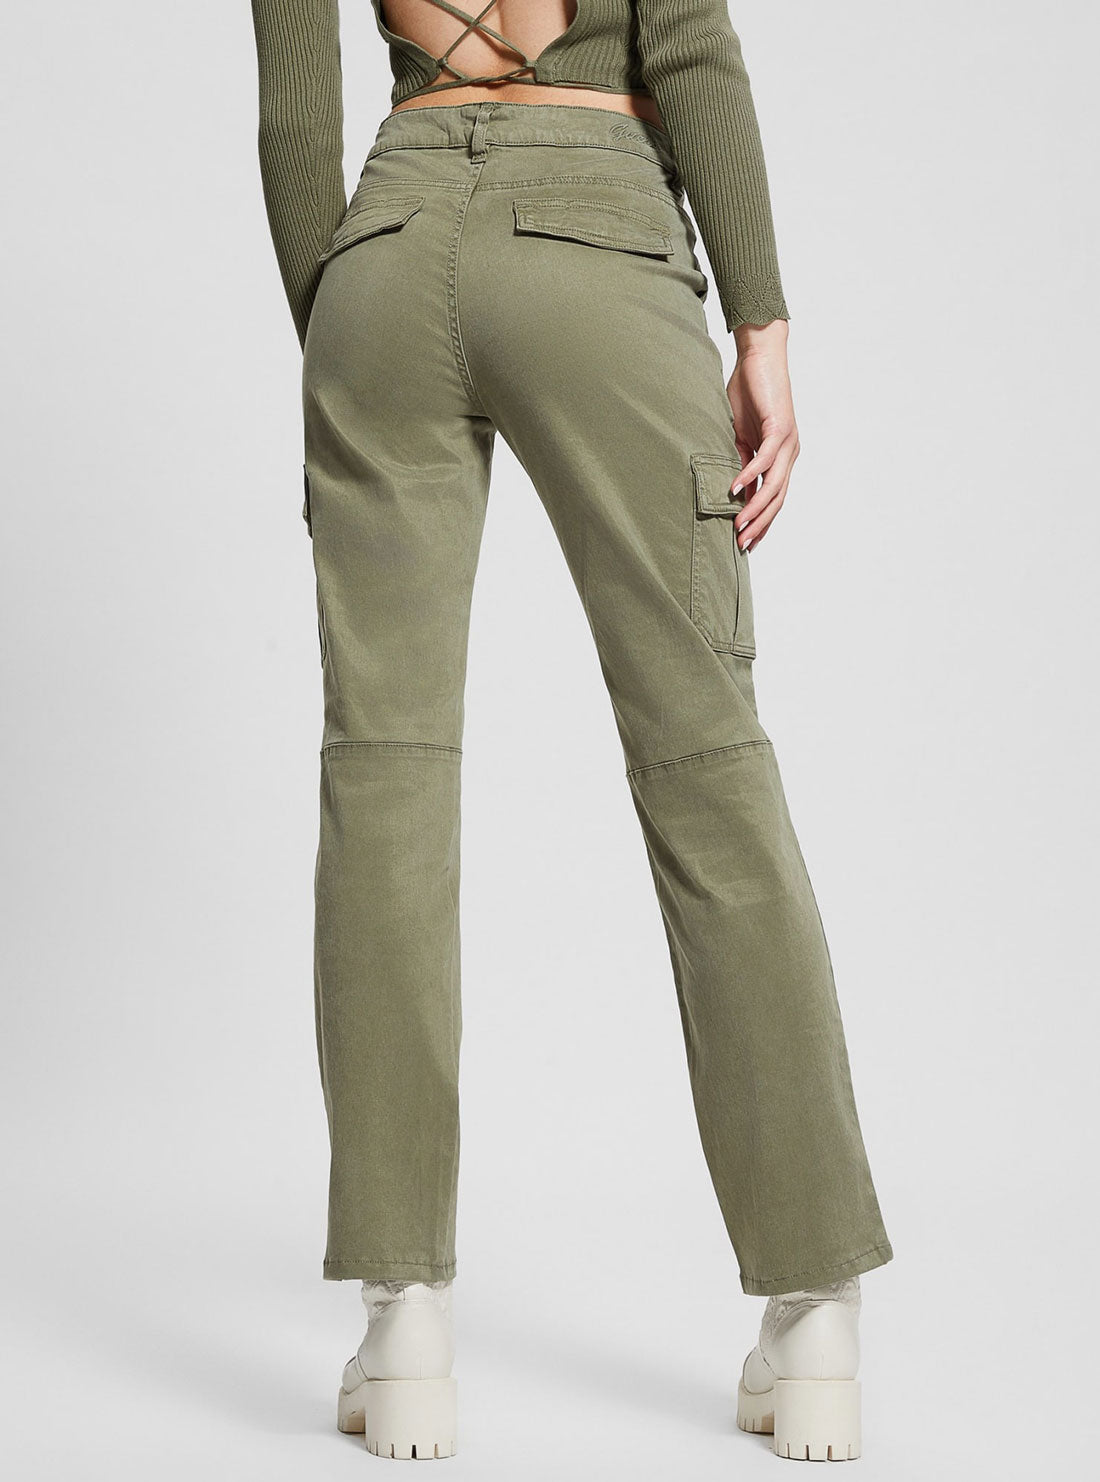 GUESS Green Straight-Leg Cargo Pants back view